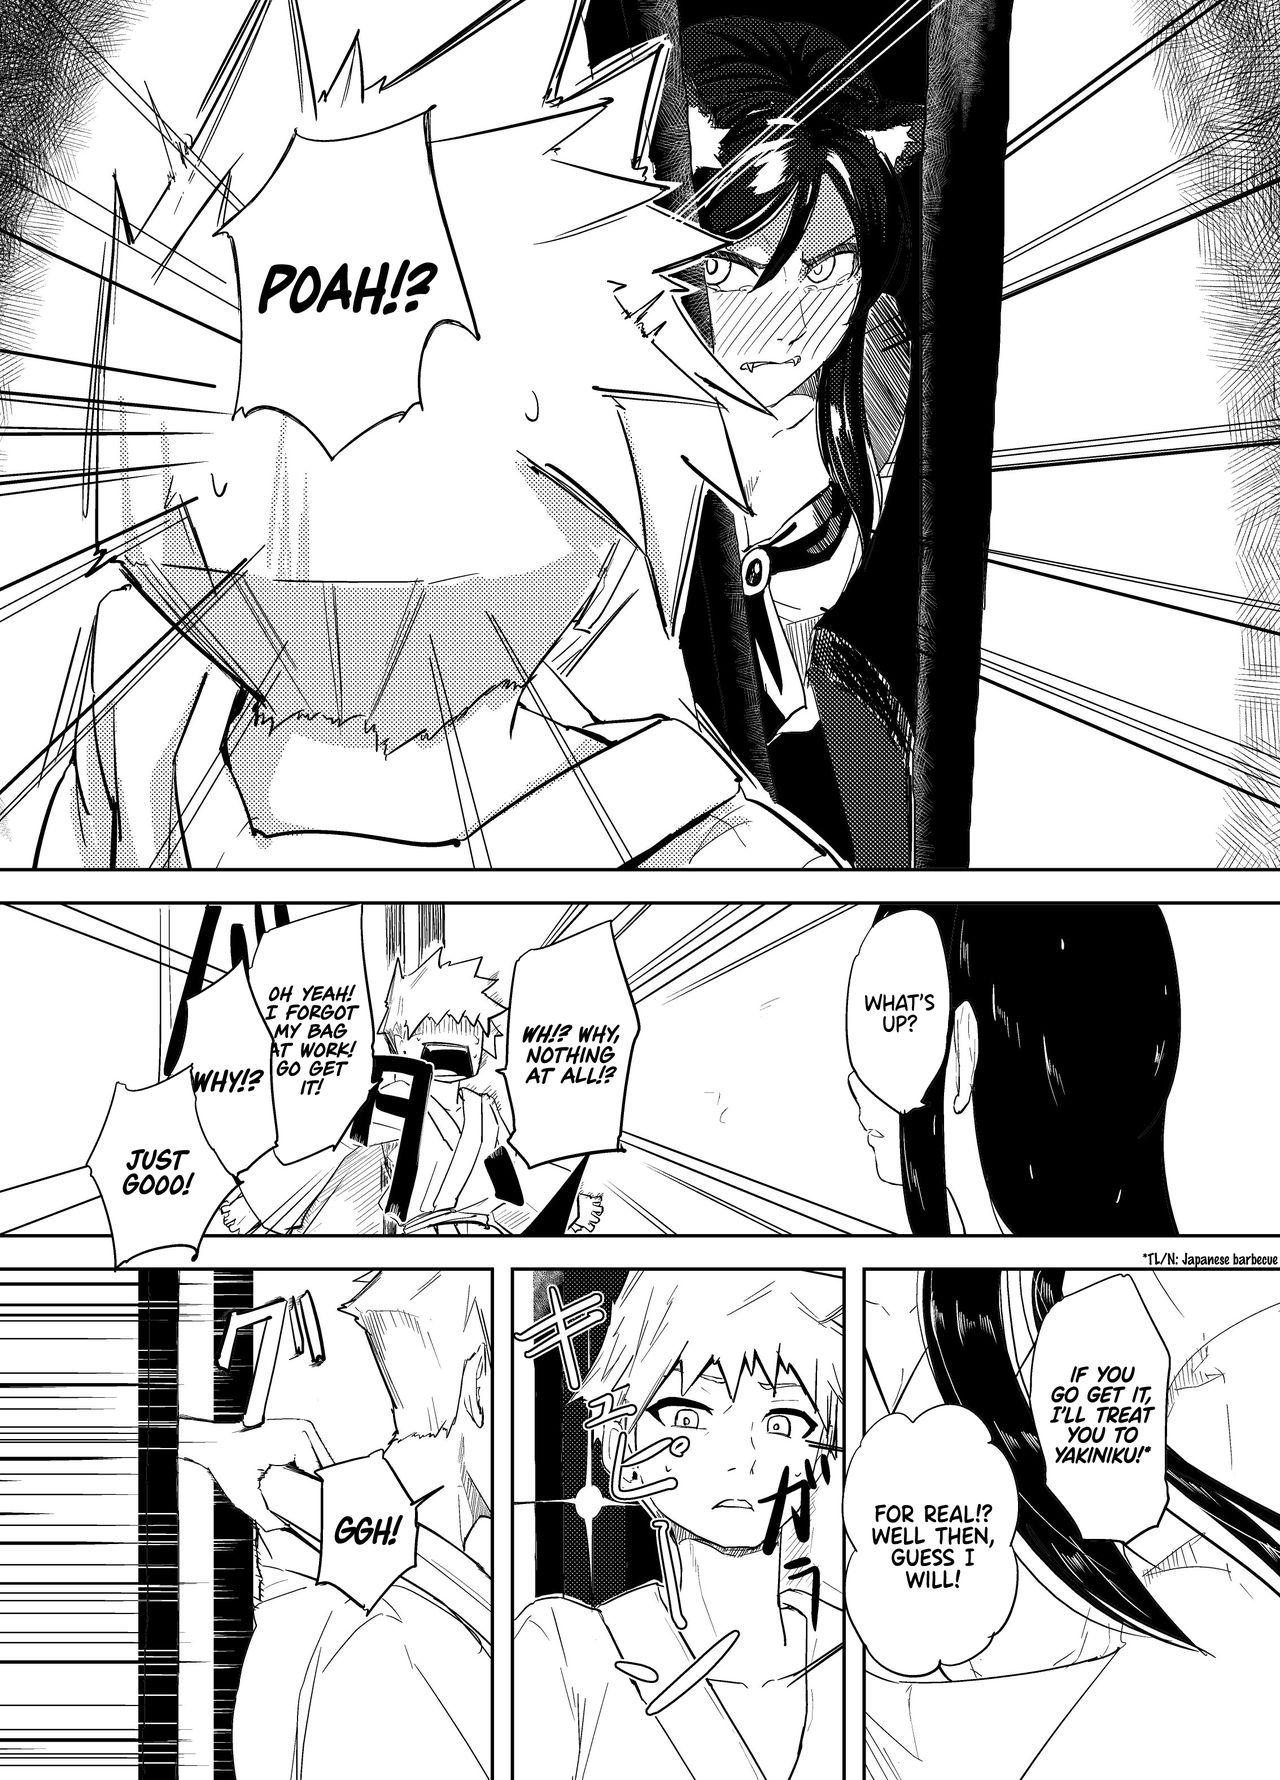 Brasil Kumo no Kire Ma ni | One Cloudy Day - Touhou project Hot Whores - Page 9